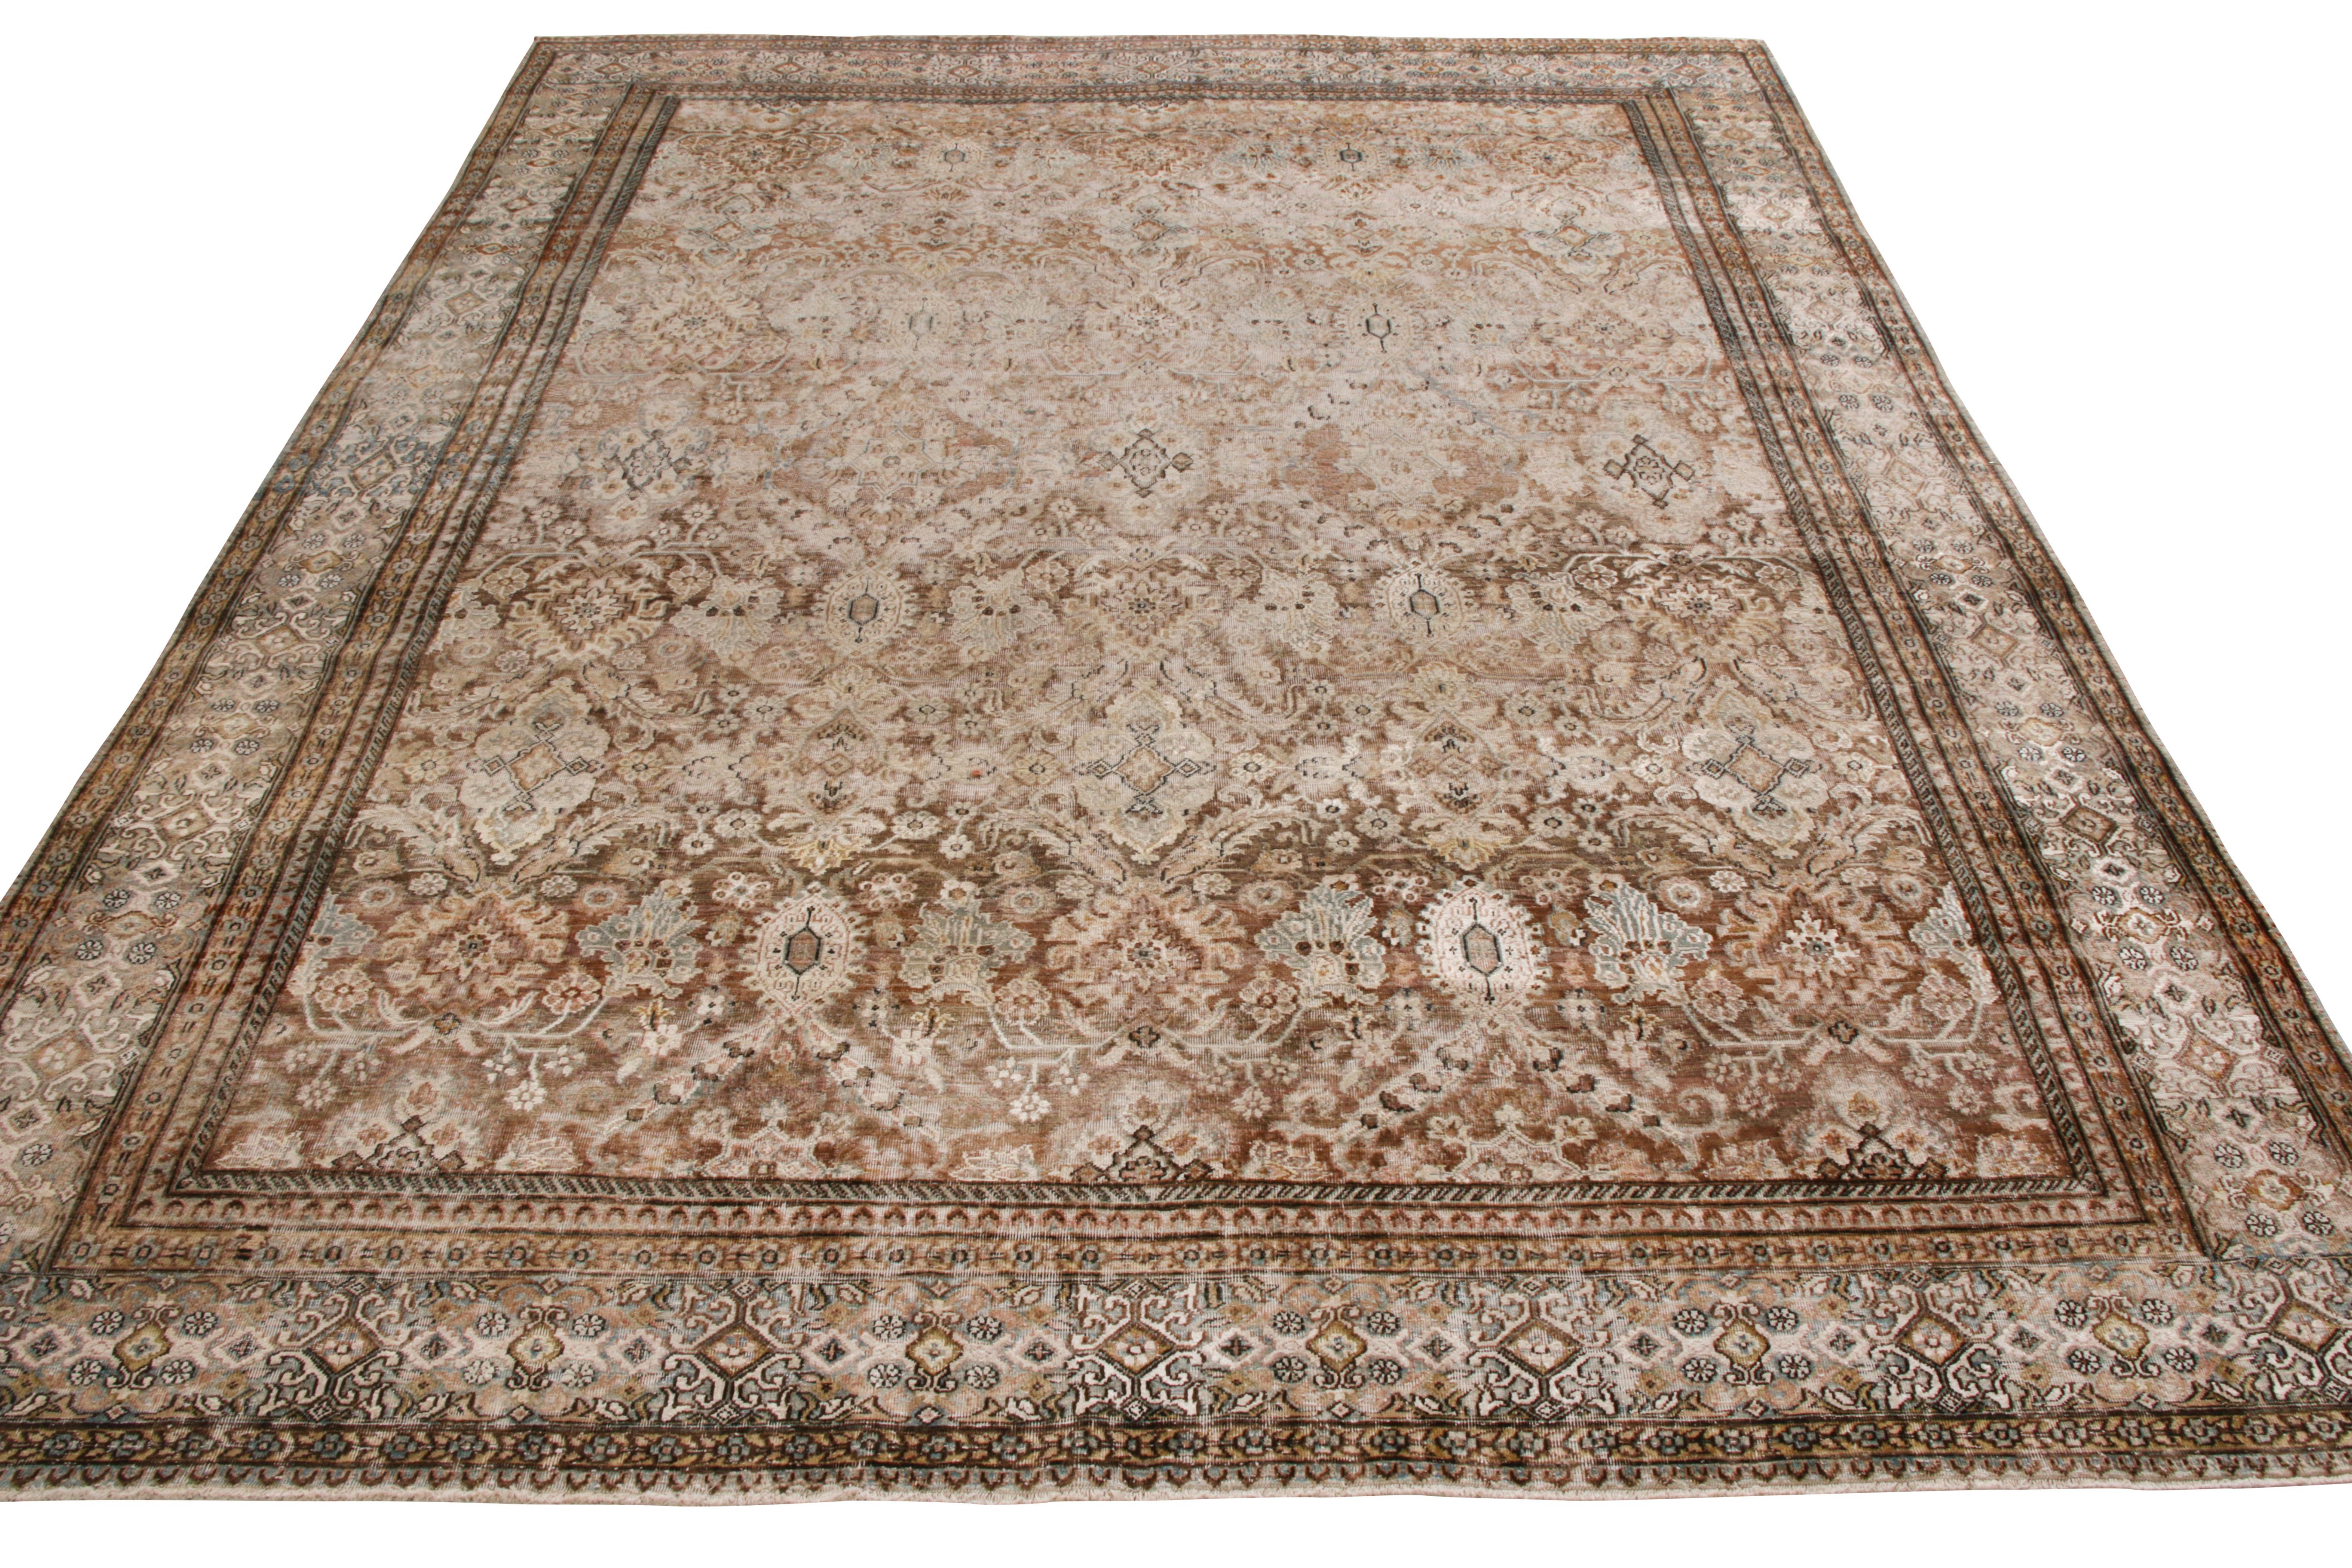 A magnificent 8 x 10 ode to antique Oriental rug styles, joining Rug & Kilim’s Modern Classic collection. True to the essence, the rug features gorgeous palmette floral patterns in luscious hues of beige-brown with blue accenting tastefully. An